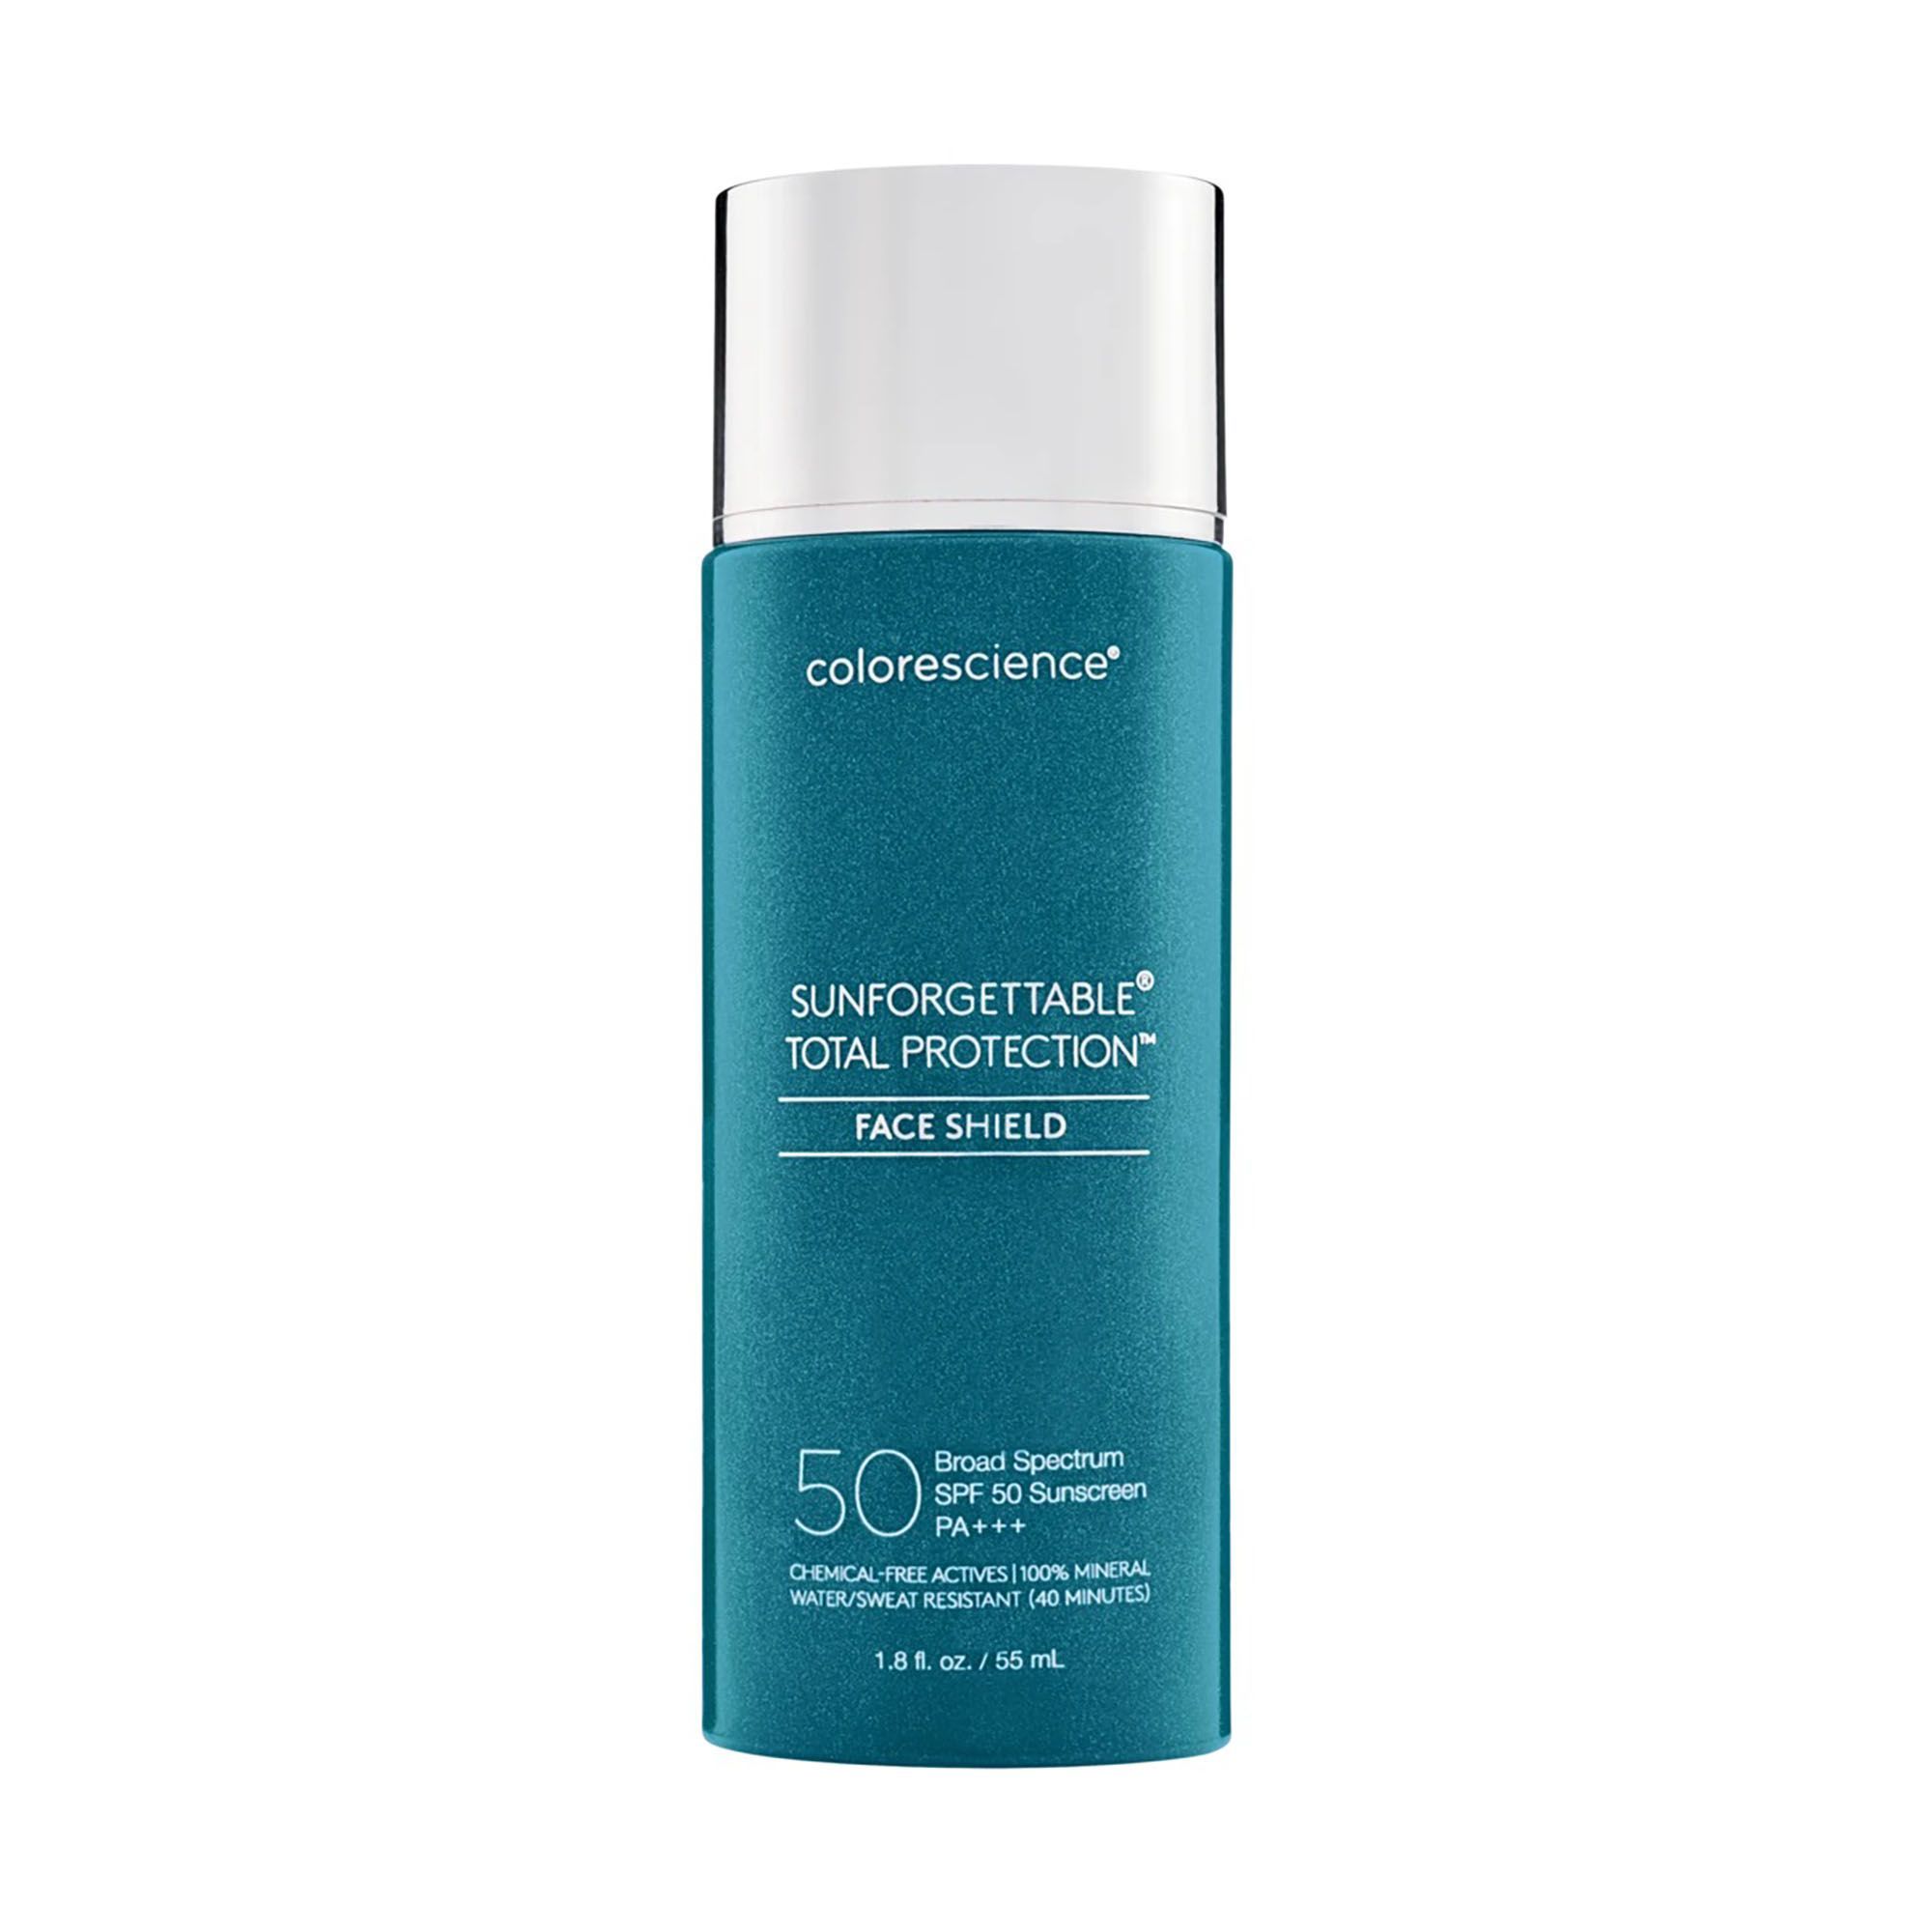 Sunforgettable Total Protection Face Shield SPF 50 (PA+++) 